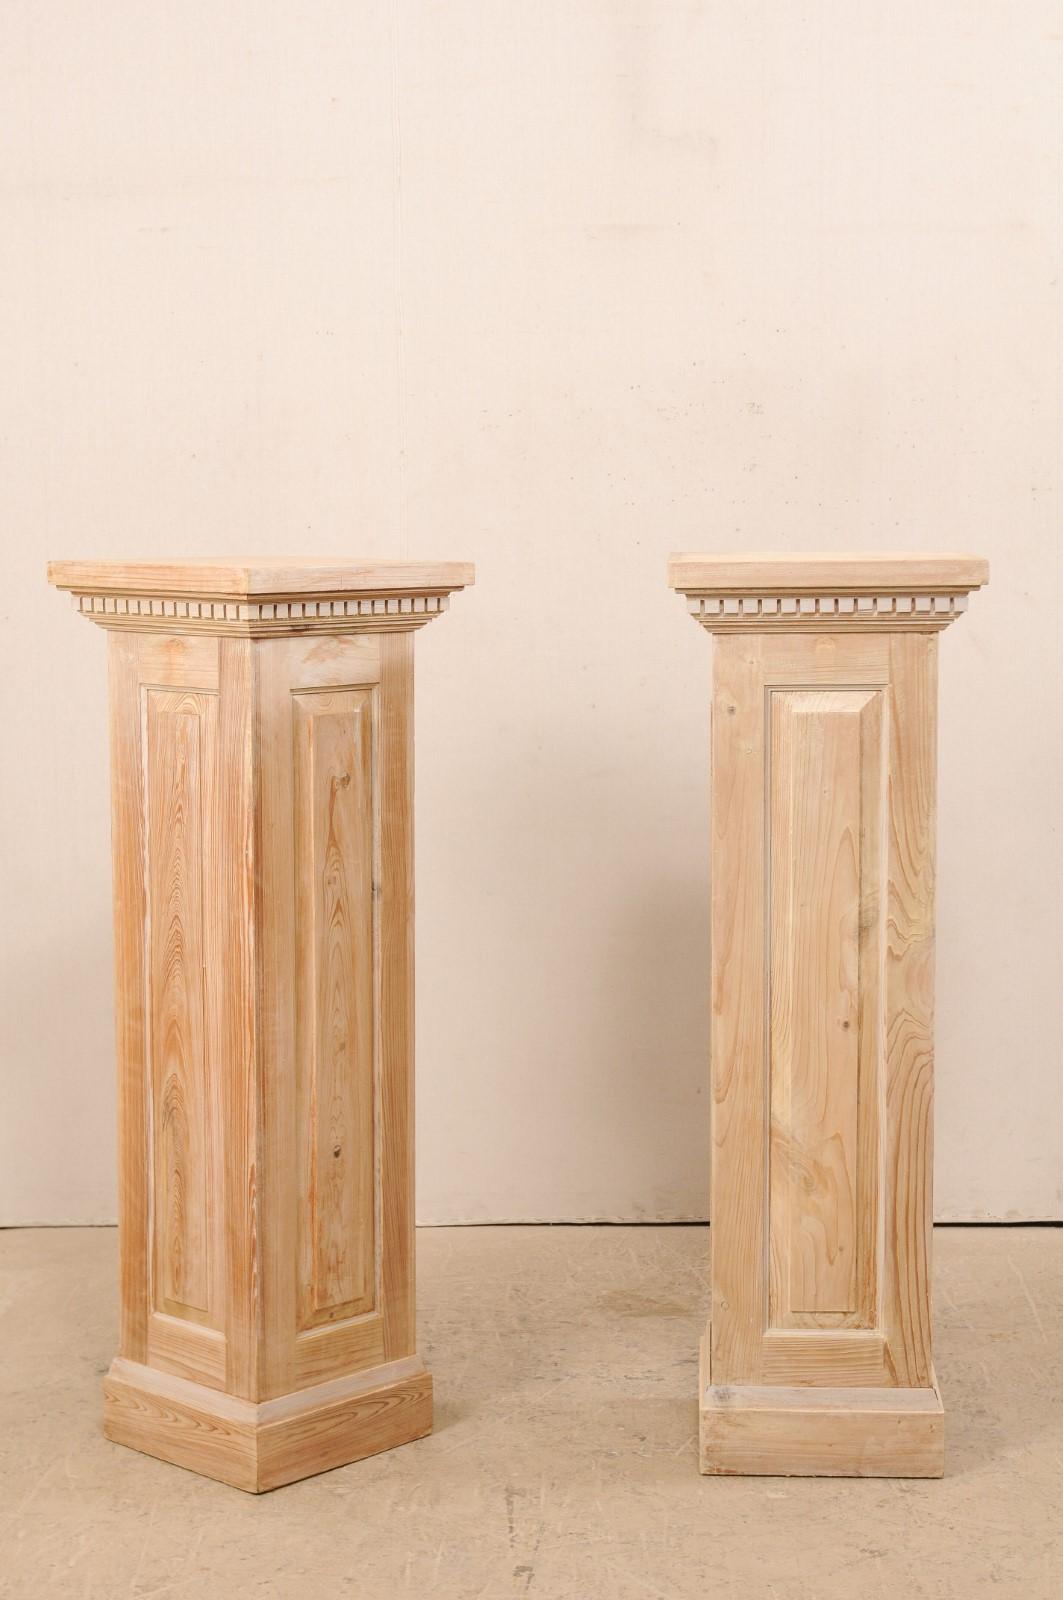 Pair of Carved Wood Squared Pedestal Columns In Good Condition For Sale In Atlanta, GA